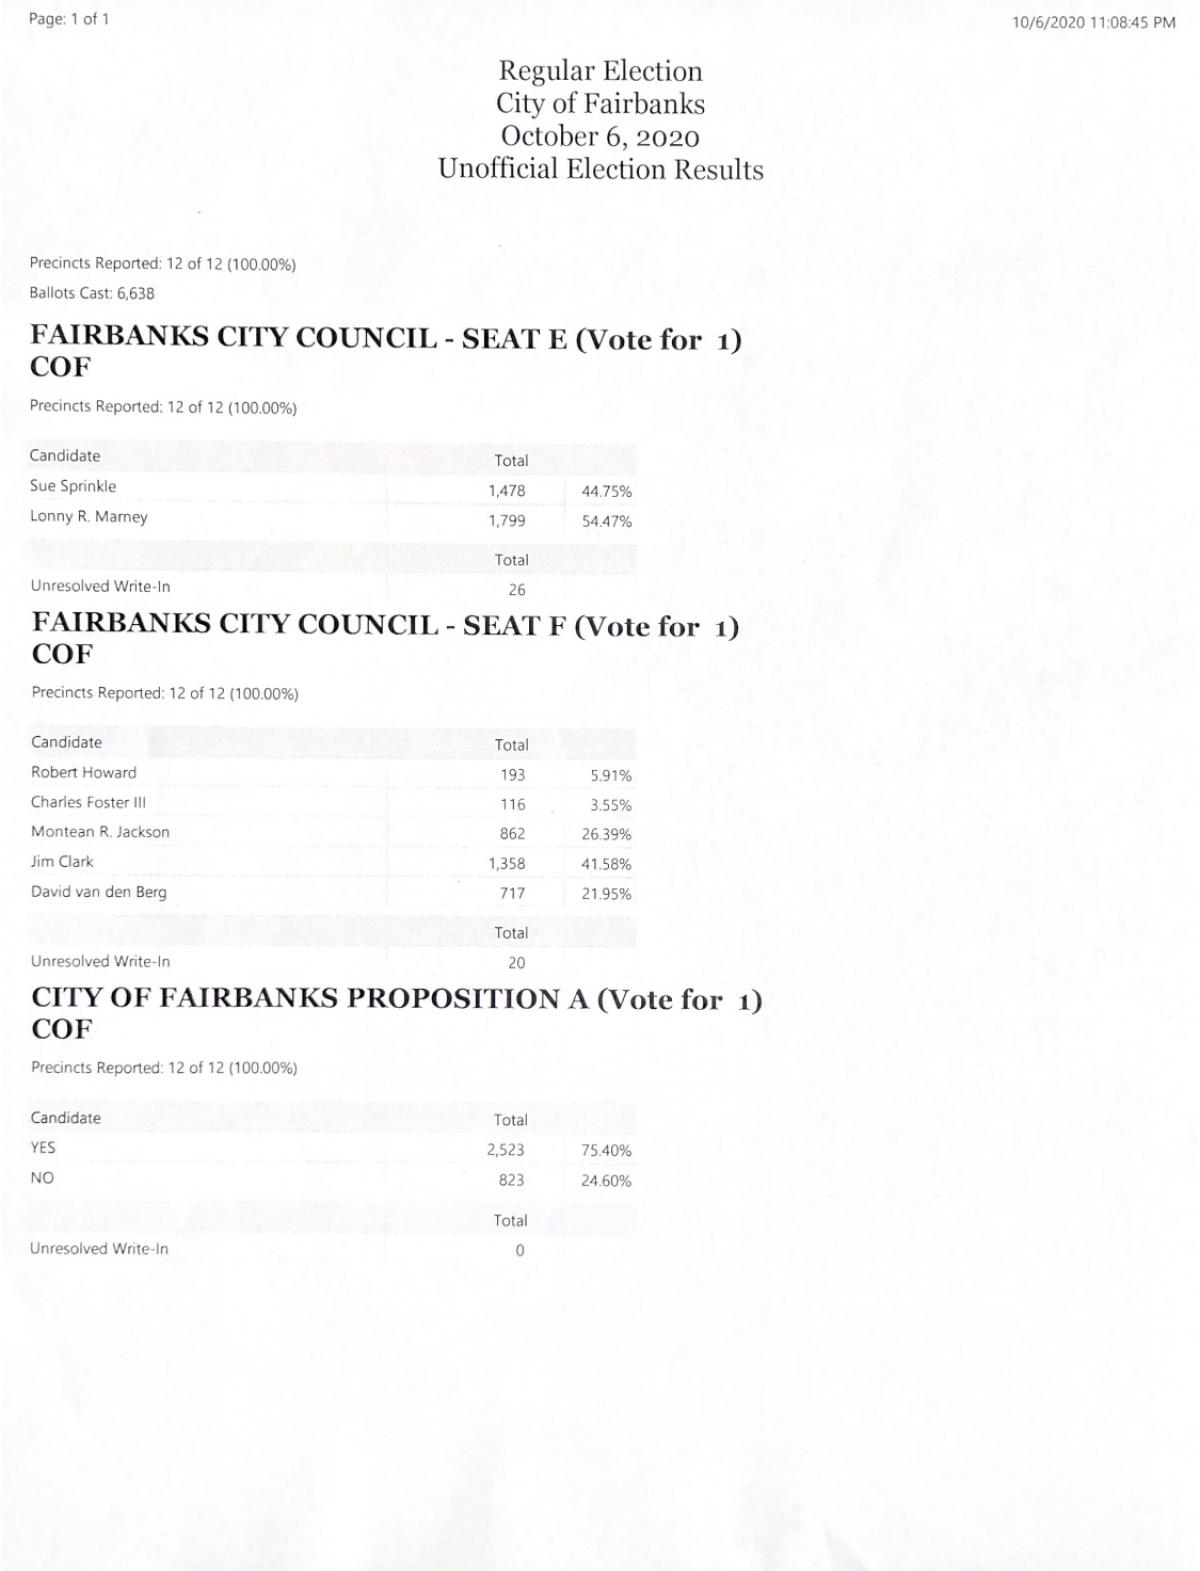 UNOFFICIAL 2020 City Regular Election Results 